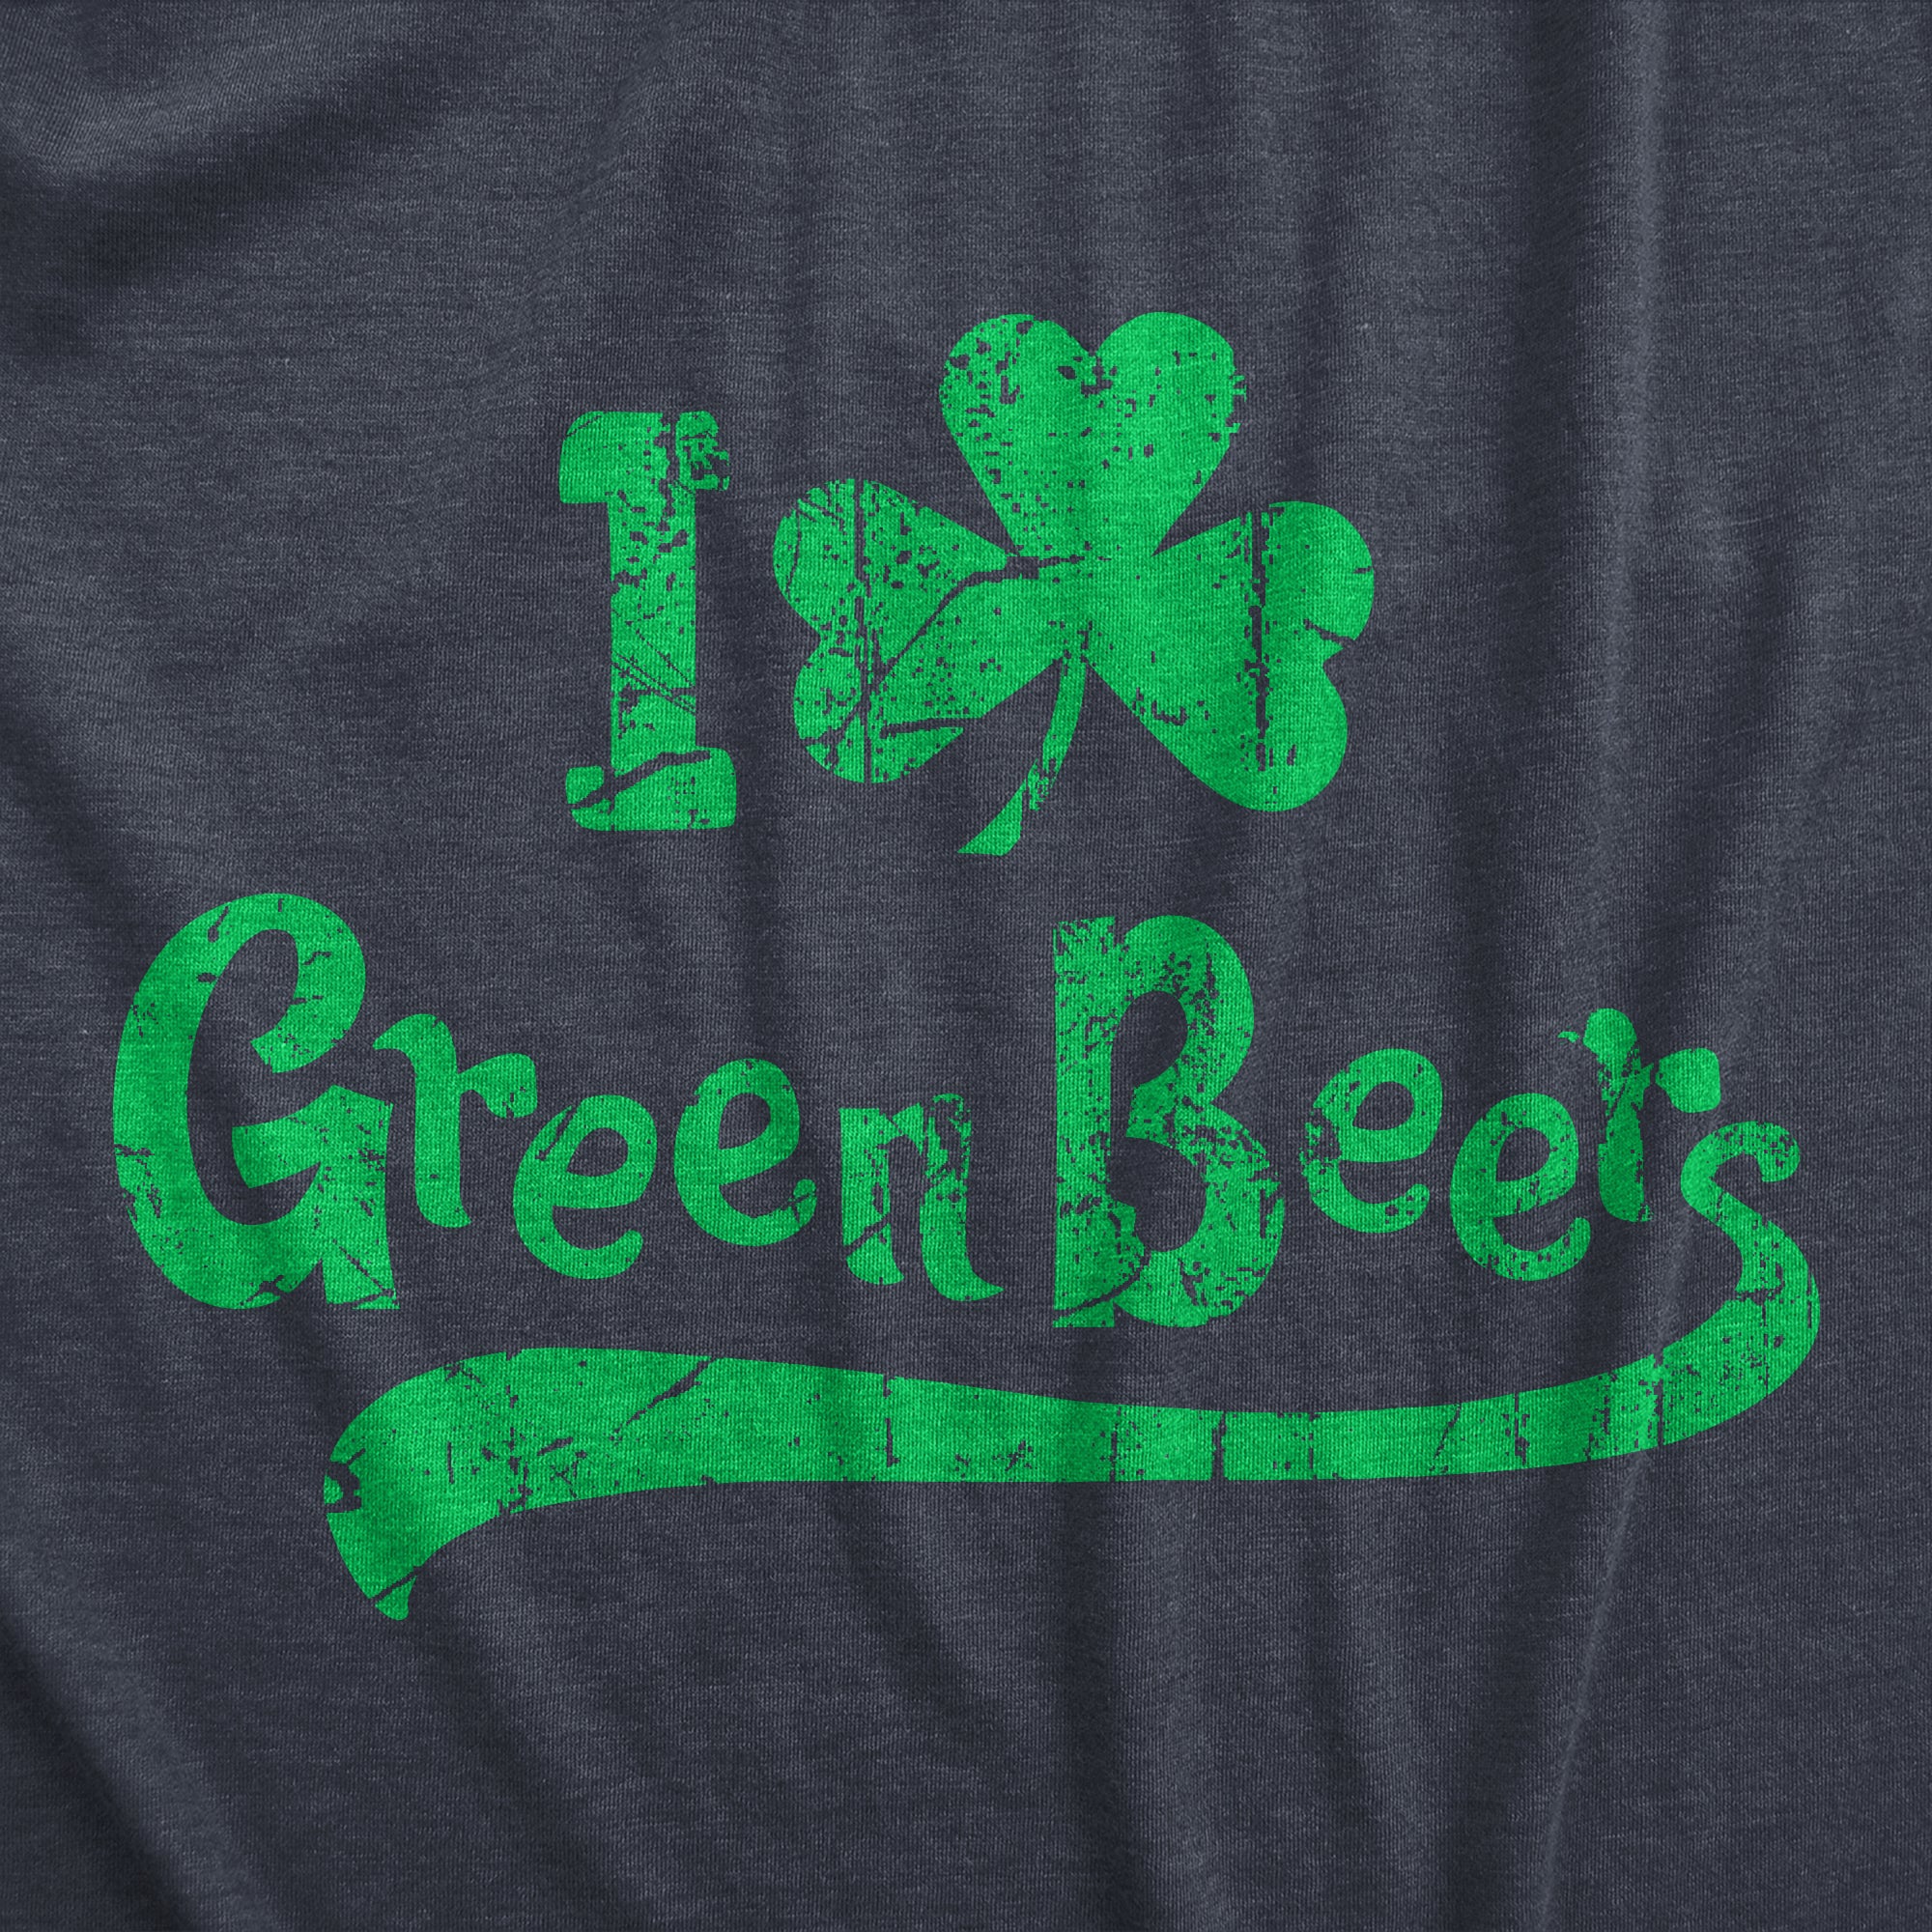 Funny Heather Navy I Clover Green Beers Mens T Shirt Nerdy Saint Patrick's Day Beer Drinking Tee